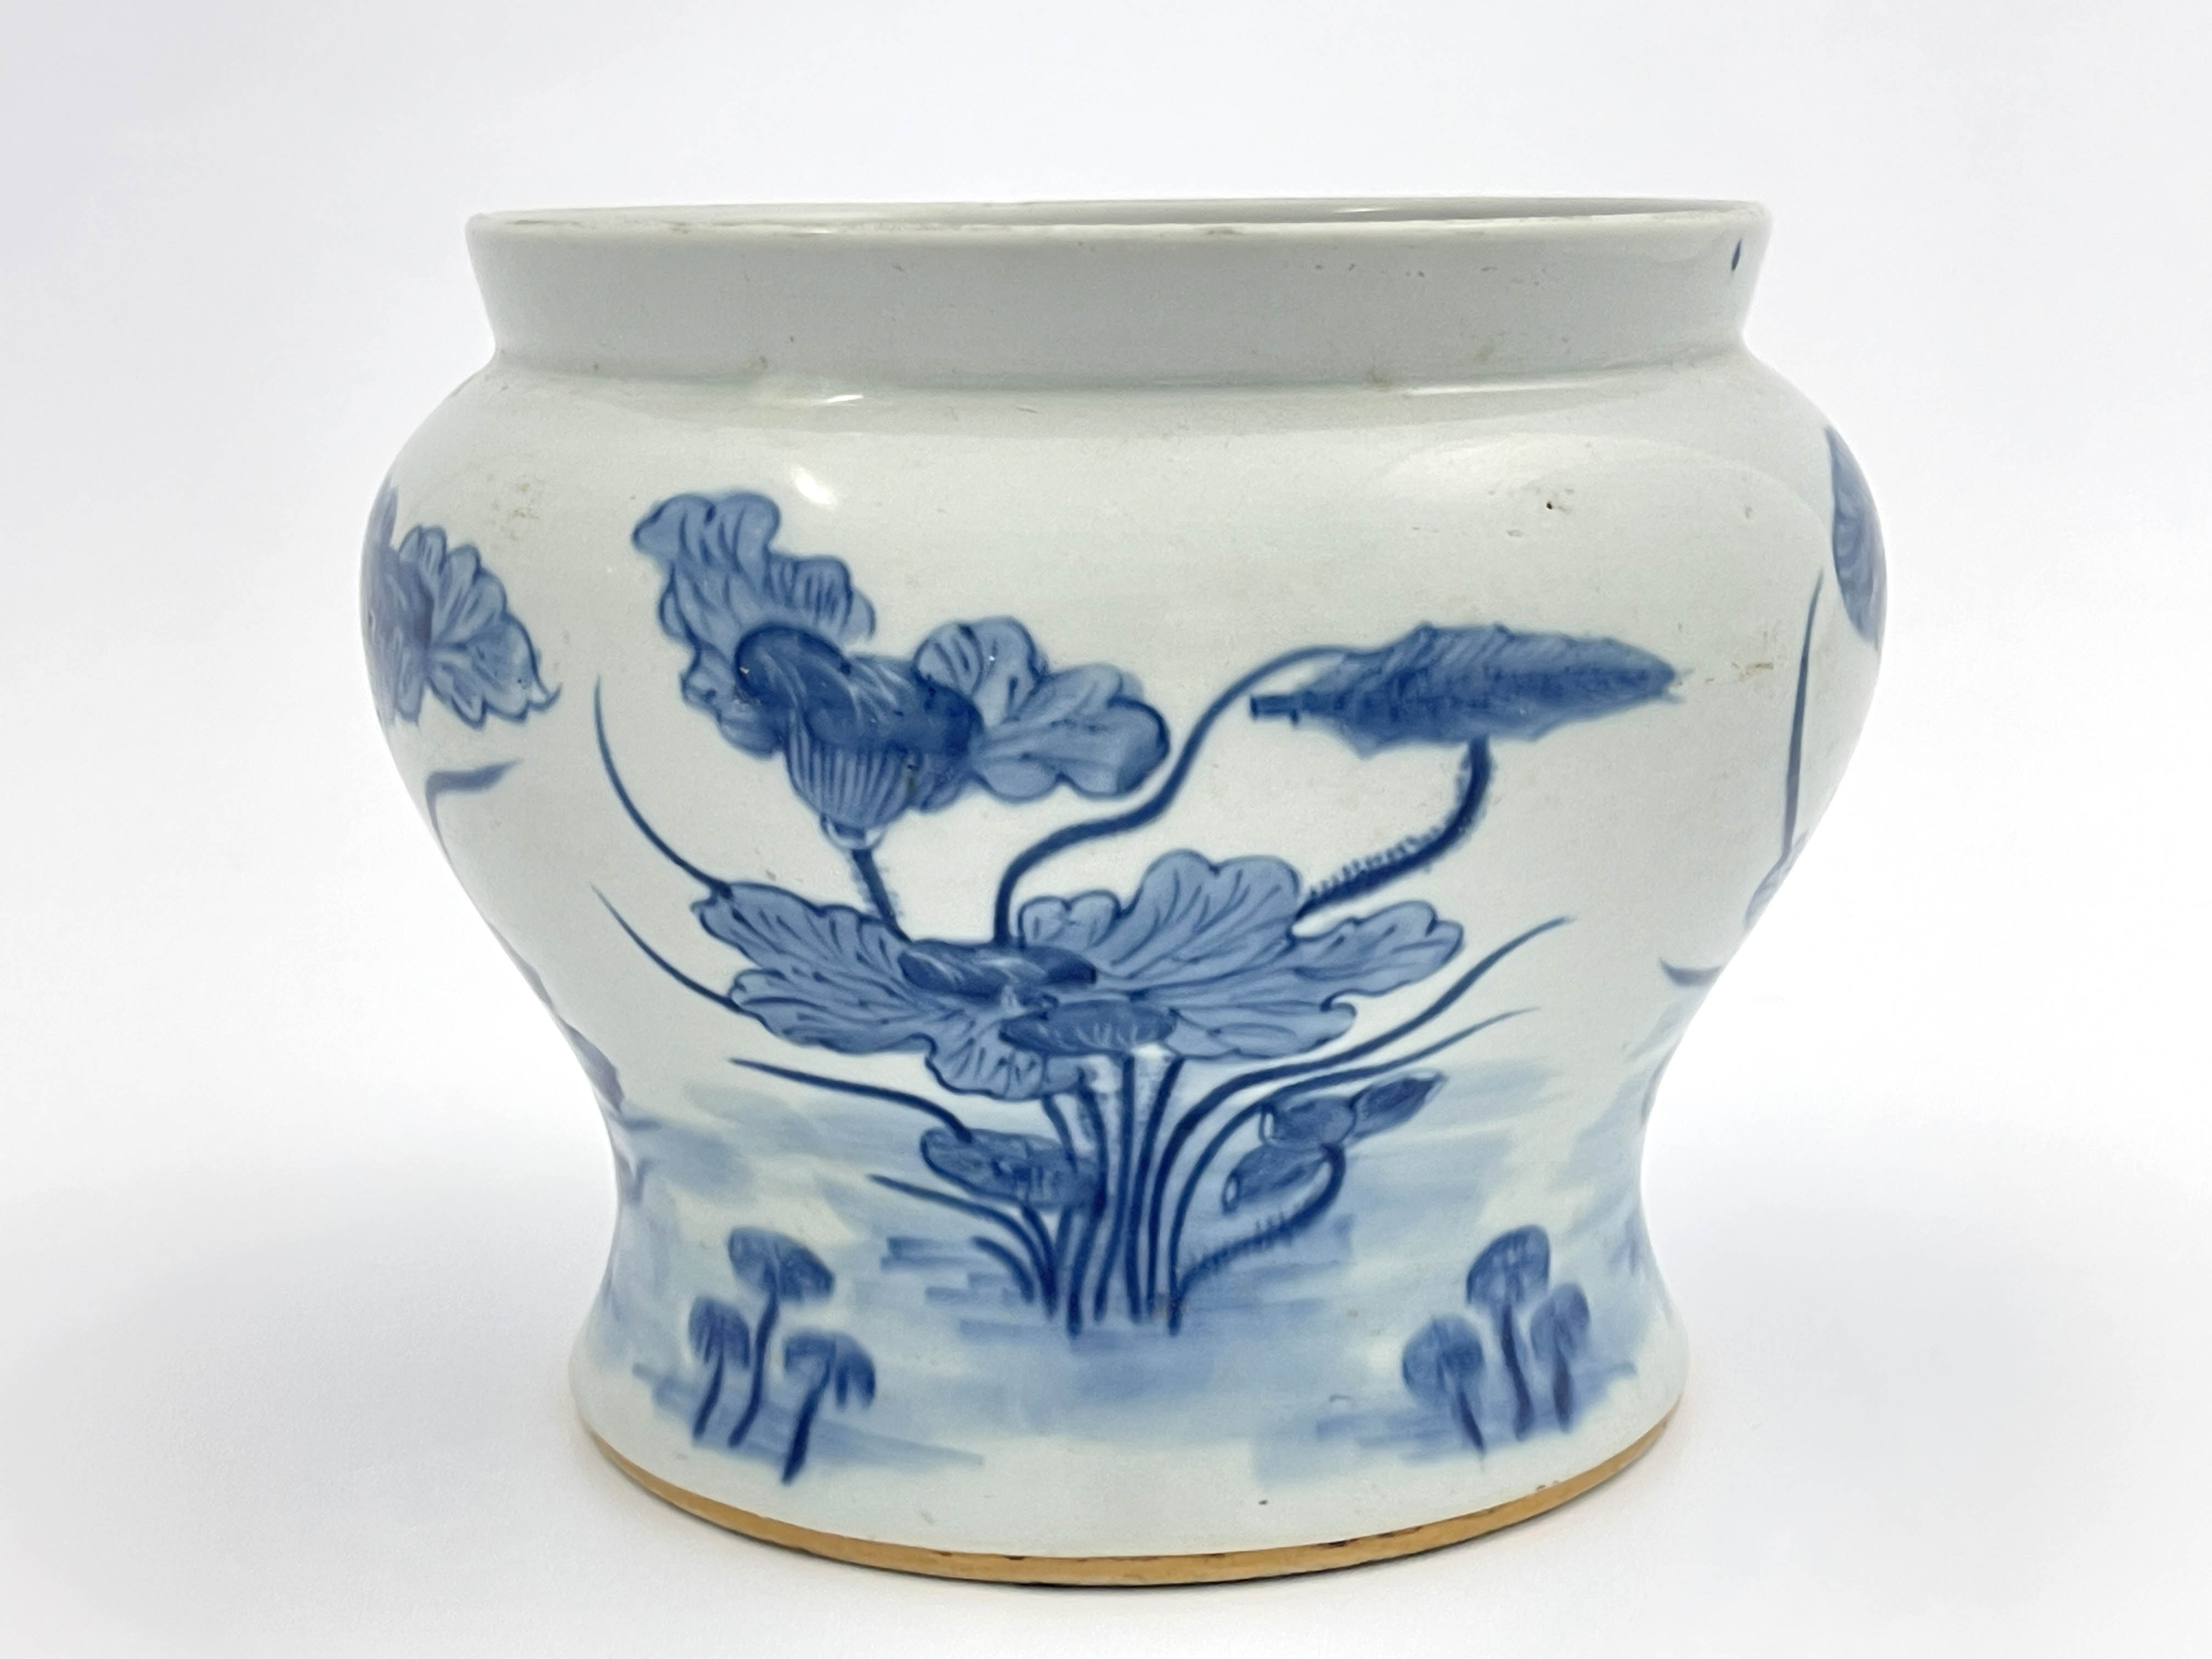 A 19th Century Chinese provincial blue and white jardiniere, of bombe form, painted with a frieze of